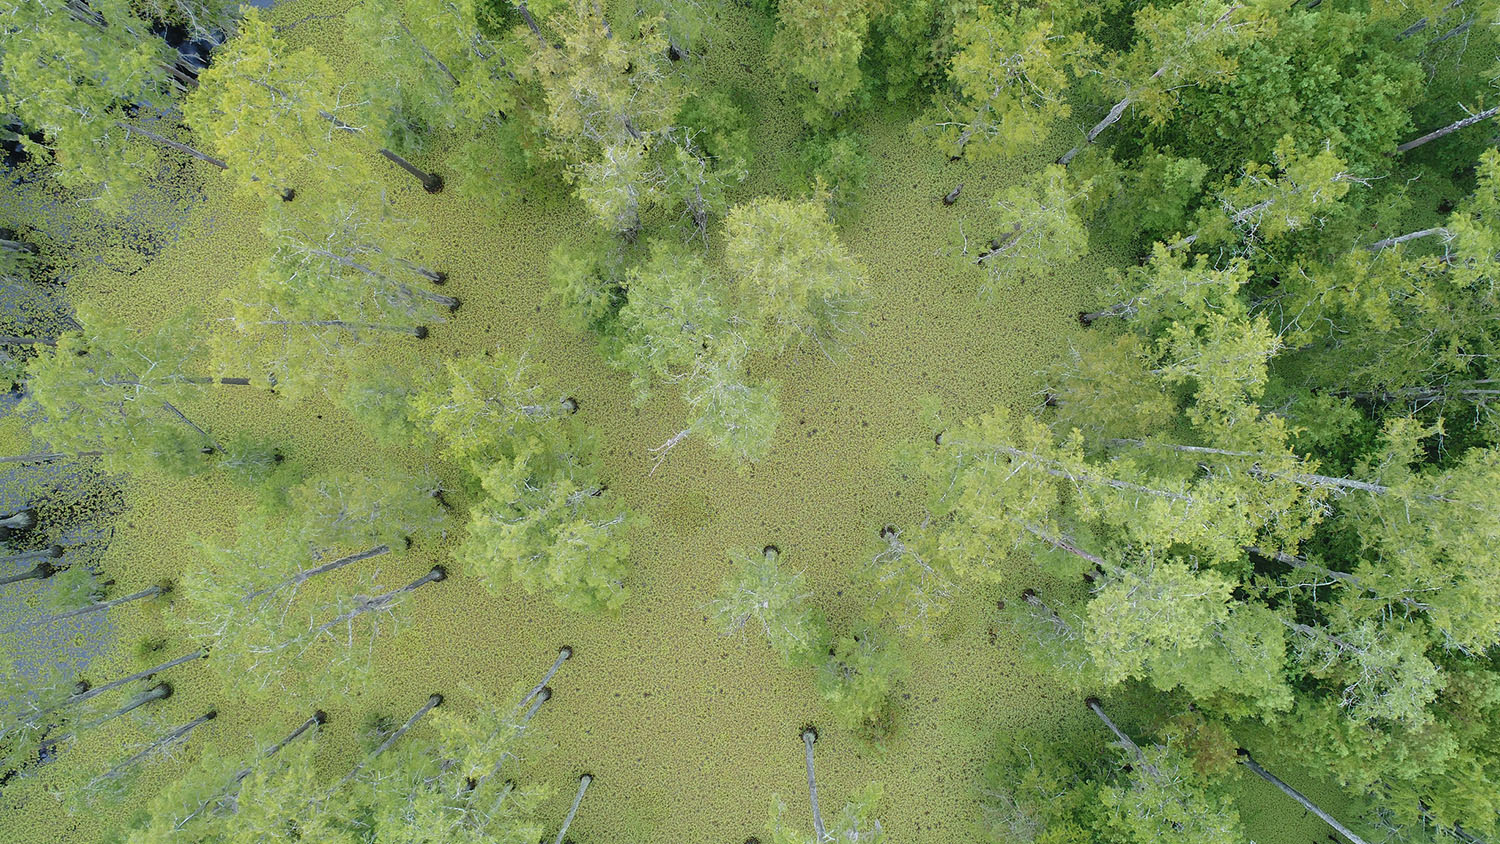 aerial view of a wetland forest shows green trees and patches of floating weed - NC State Researchers: Show Us What You're Working On - Forestry and Environmental Resources NC State University